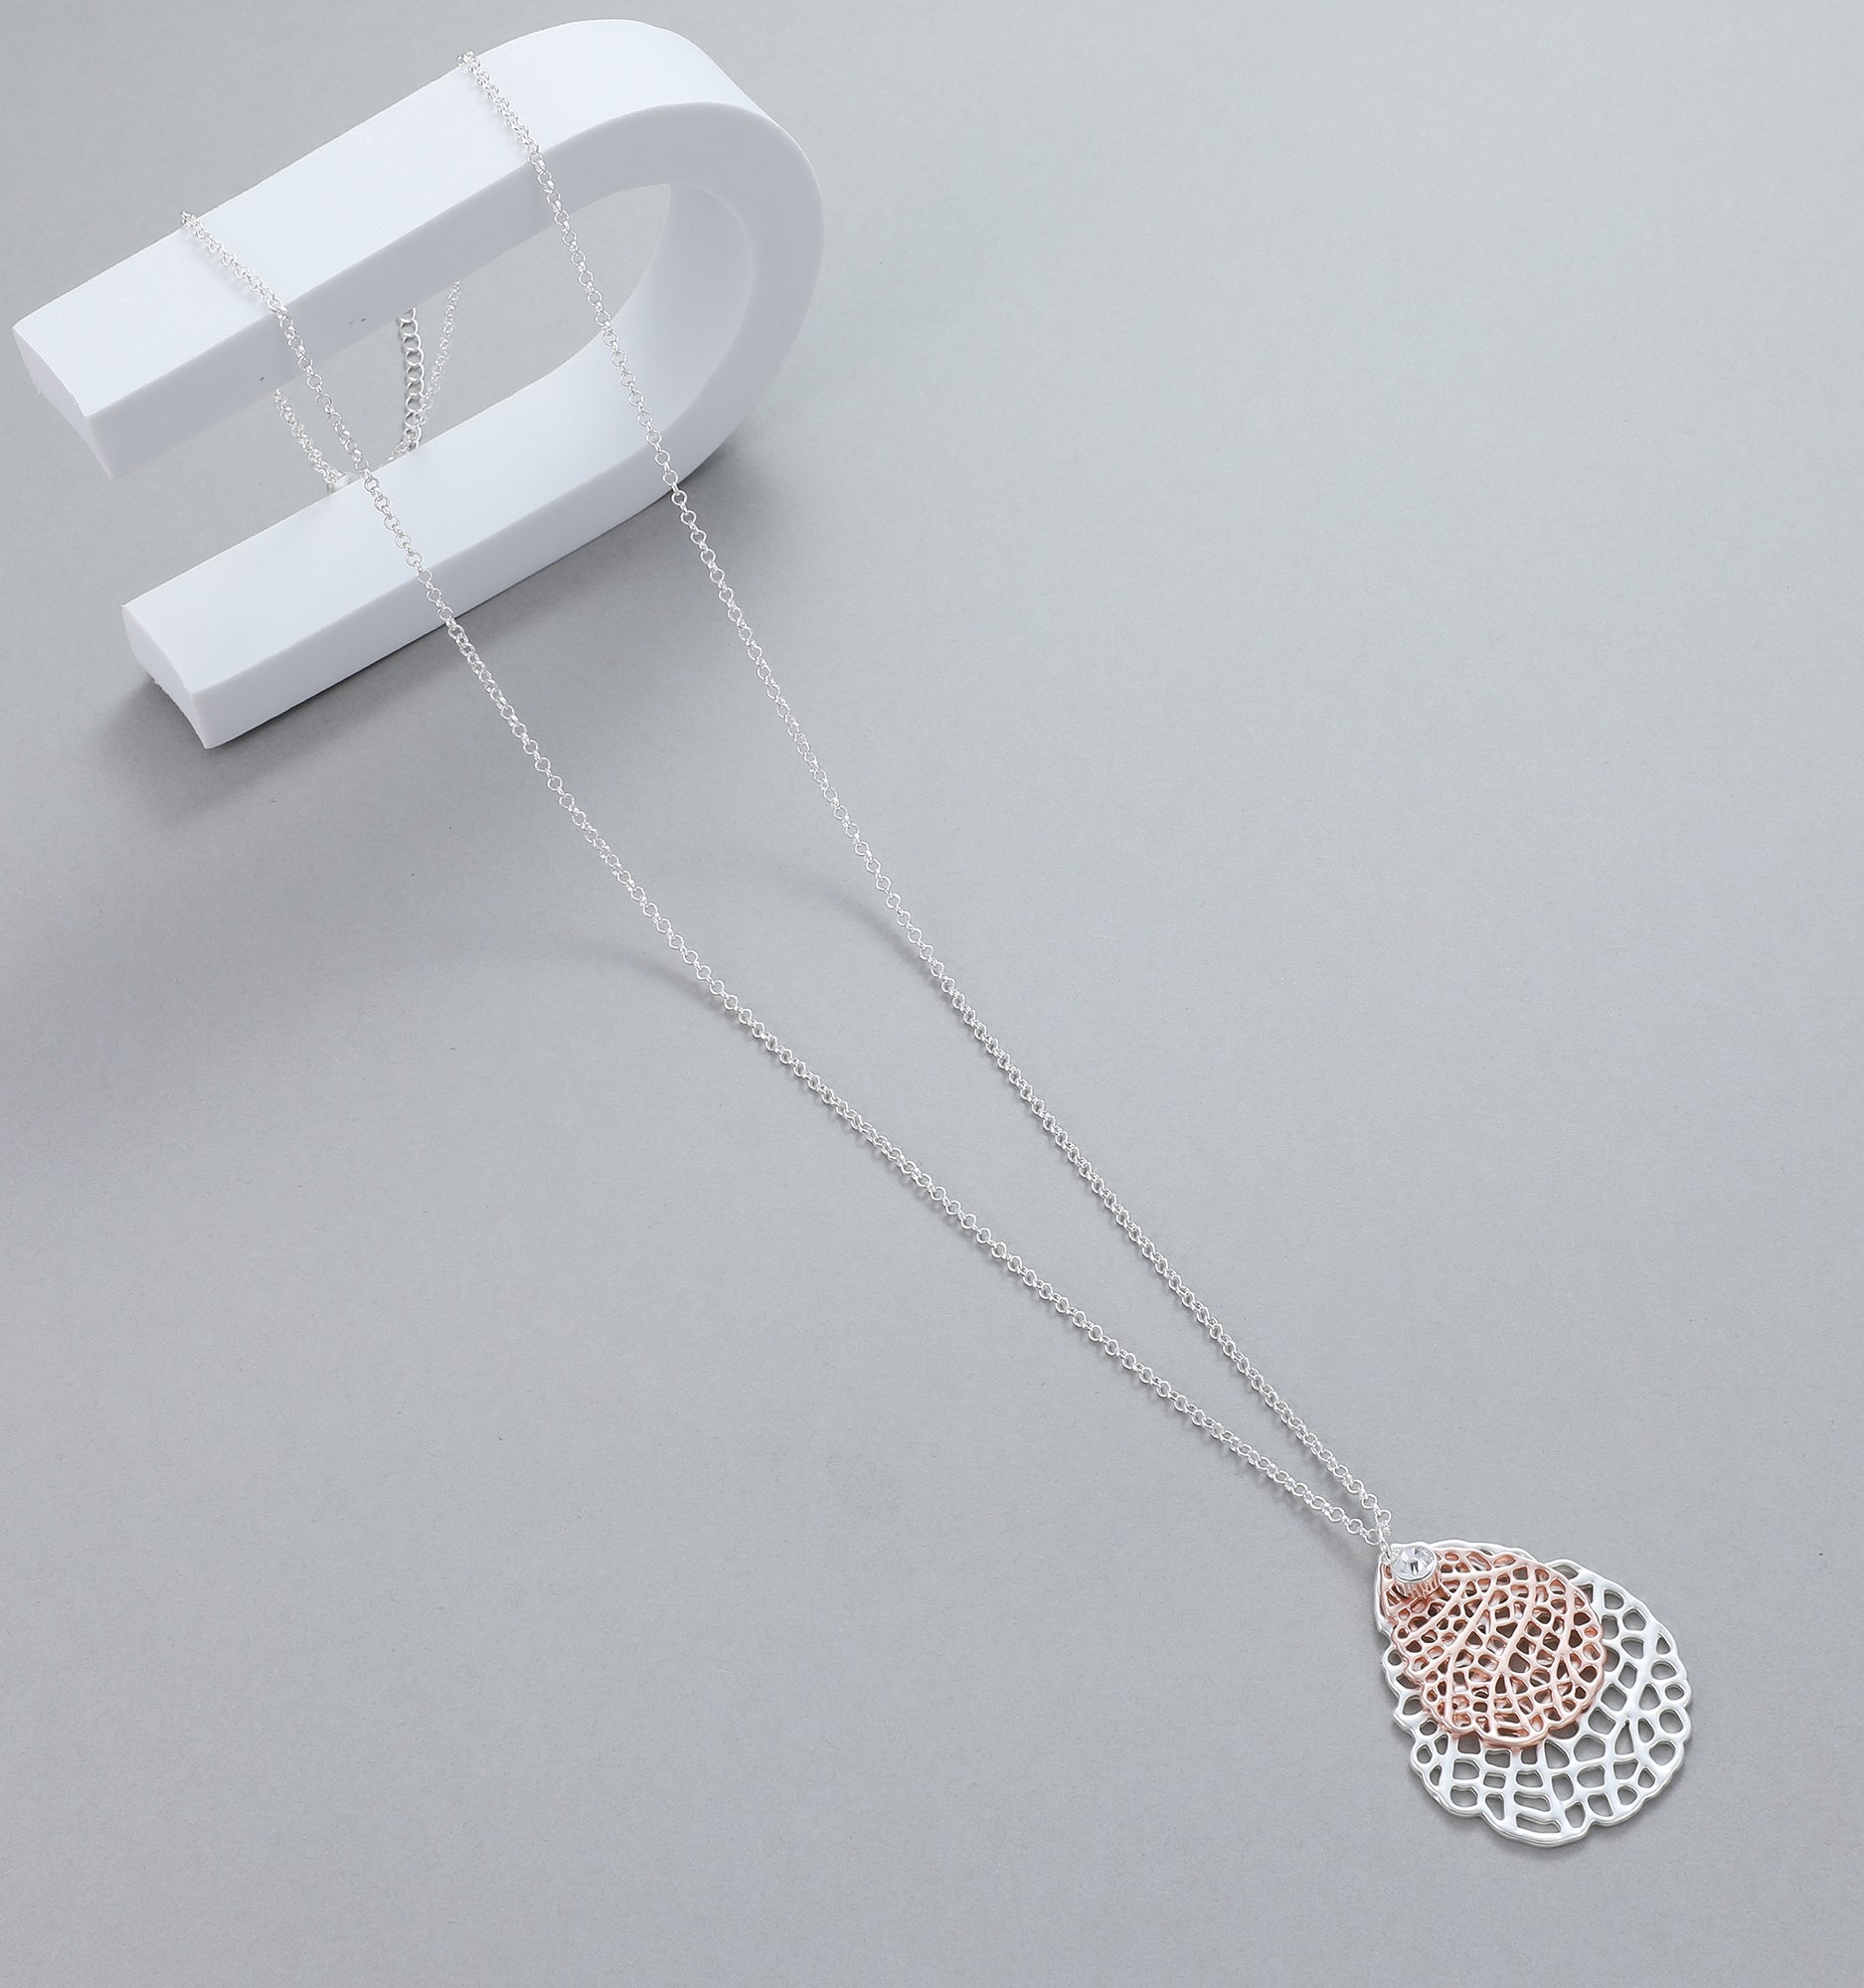 Long necklace, with matte rose gold and silver honeycomb pendant - on a fine, silver chain